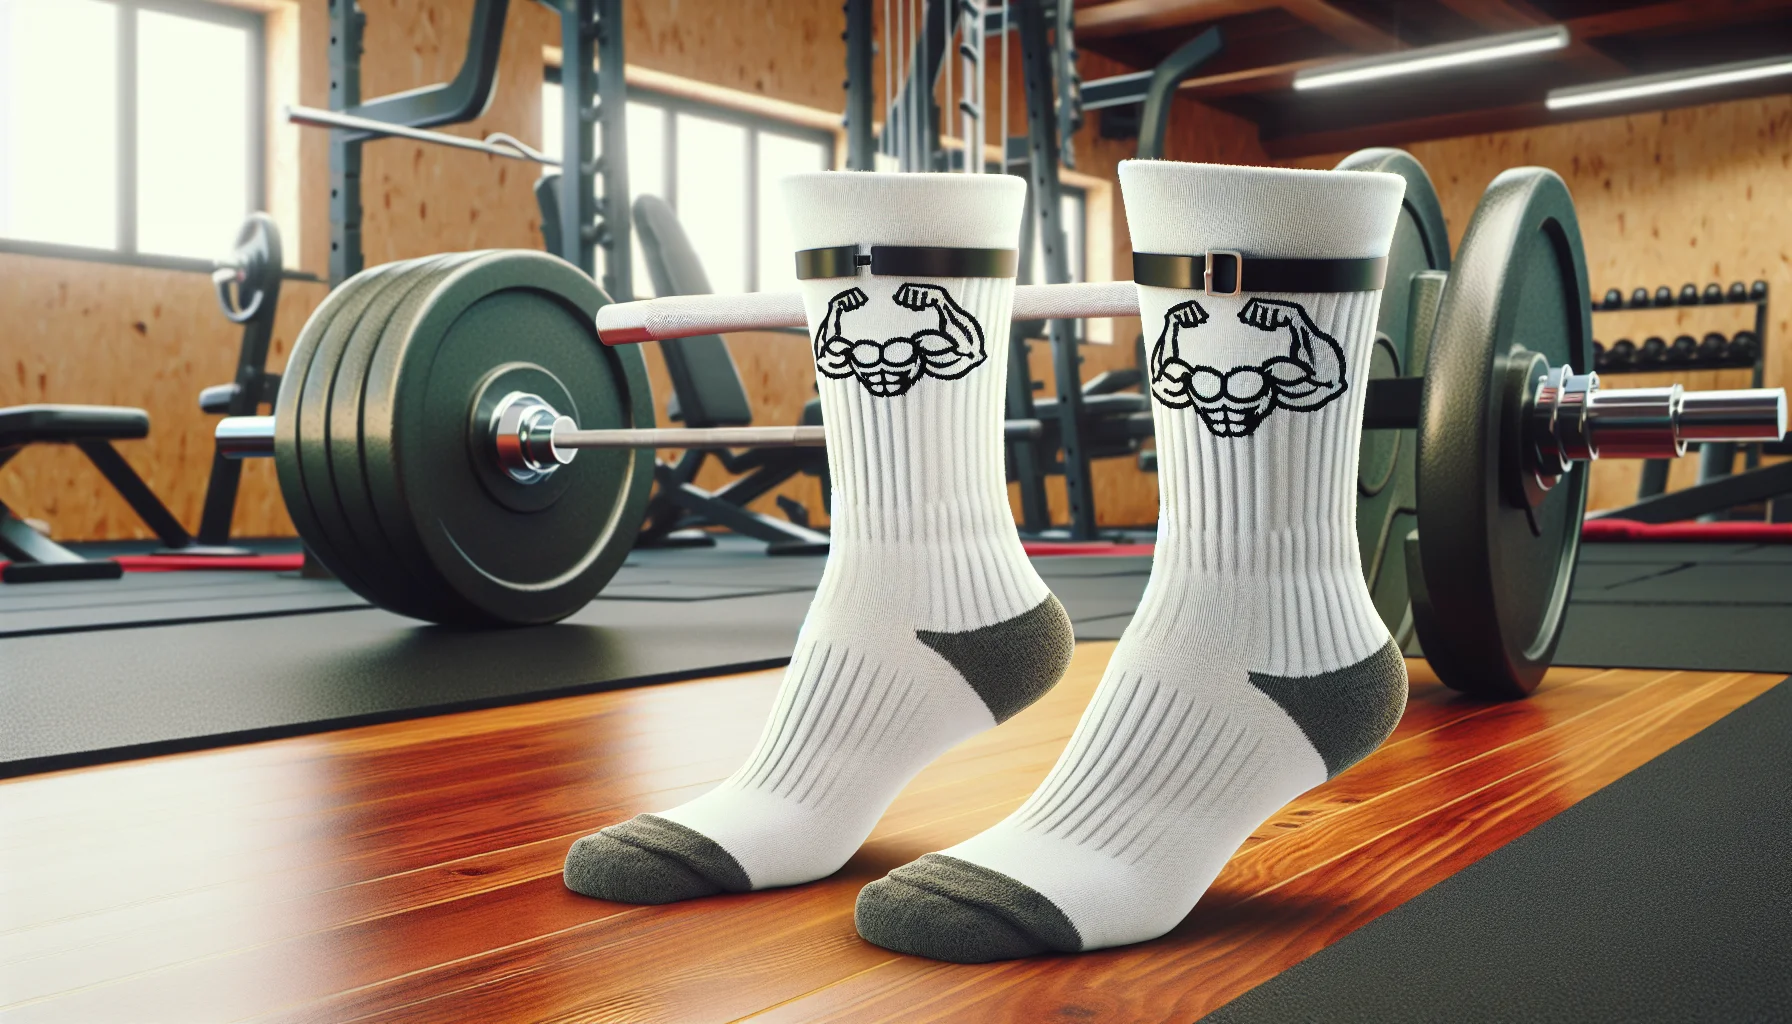 Create a humorous, realistic image featuring a pair of powerlifting socks. They are standing upright, flexing their 'muscles', and there's a barbell in the background. The socks look motivated and ready to exercise, a comical personification meant to encourage viewers to start working out. The scene takes place inside a well-equipped gym, with various exercise equipment scattered around. The color scheme should be bright and cheerful to highlight the lighthearted, fitness-inspired theme.